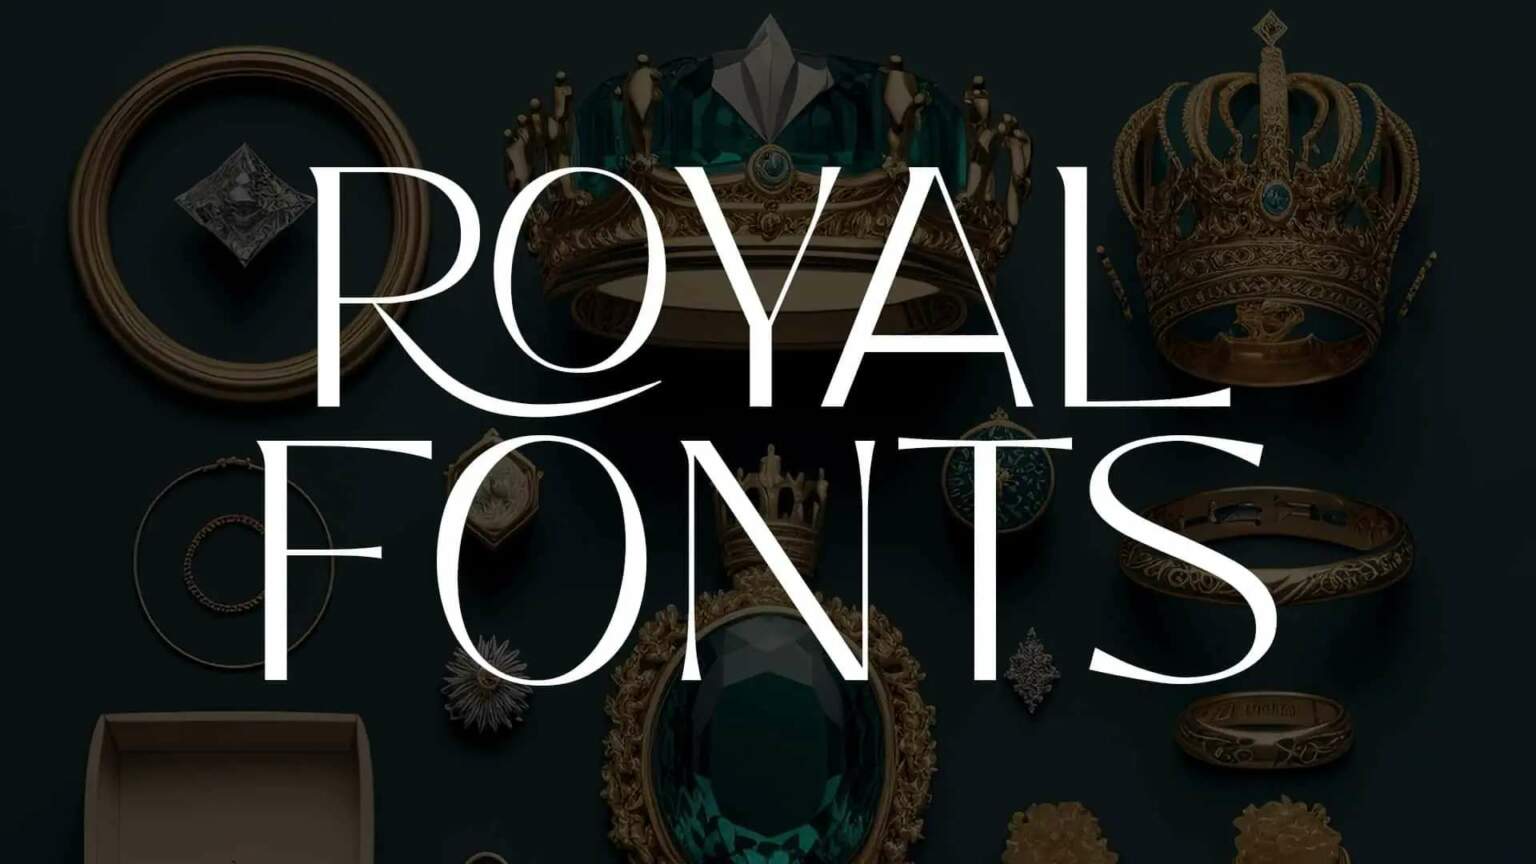 Royal Fonts For a Touch of Elegance to Your Branding